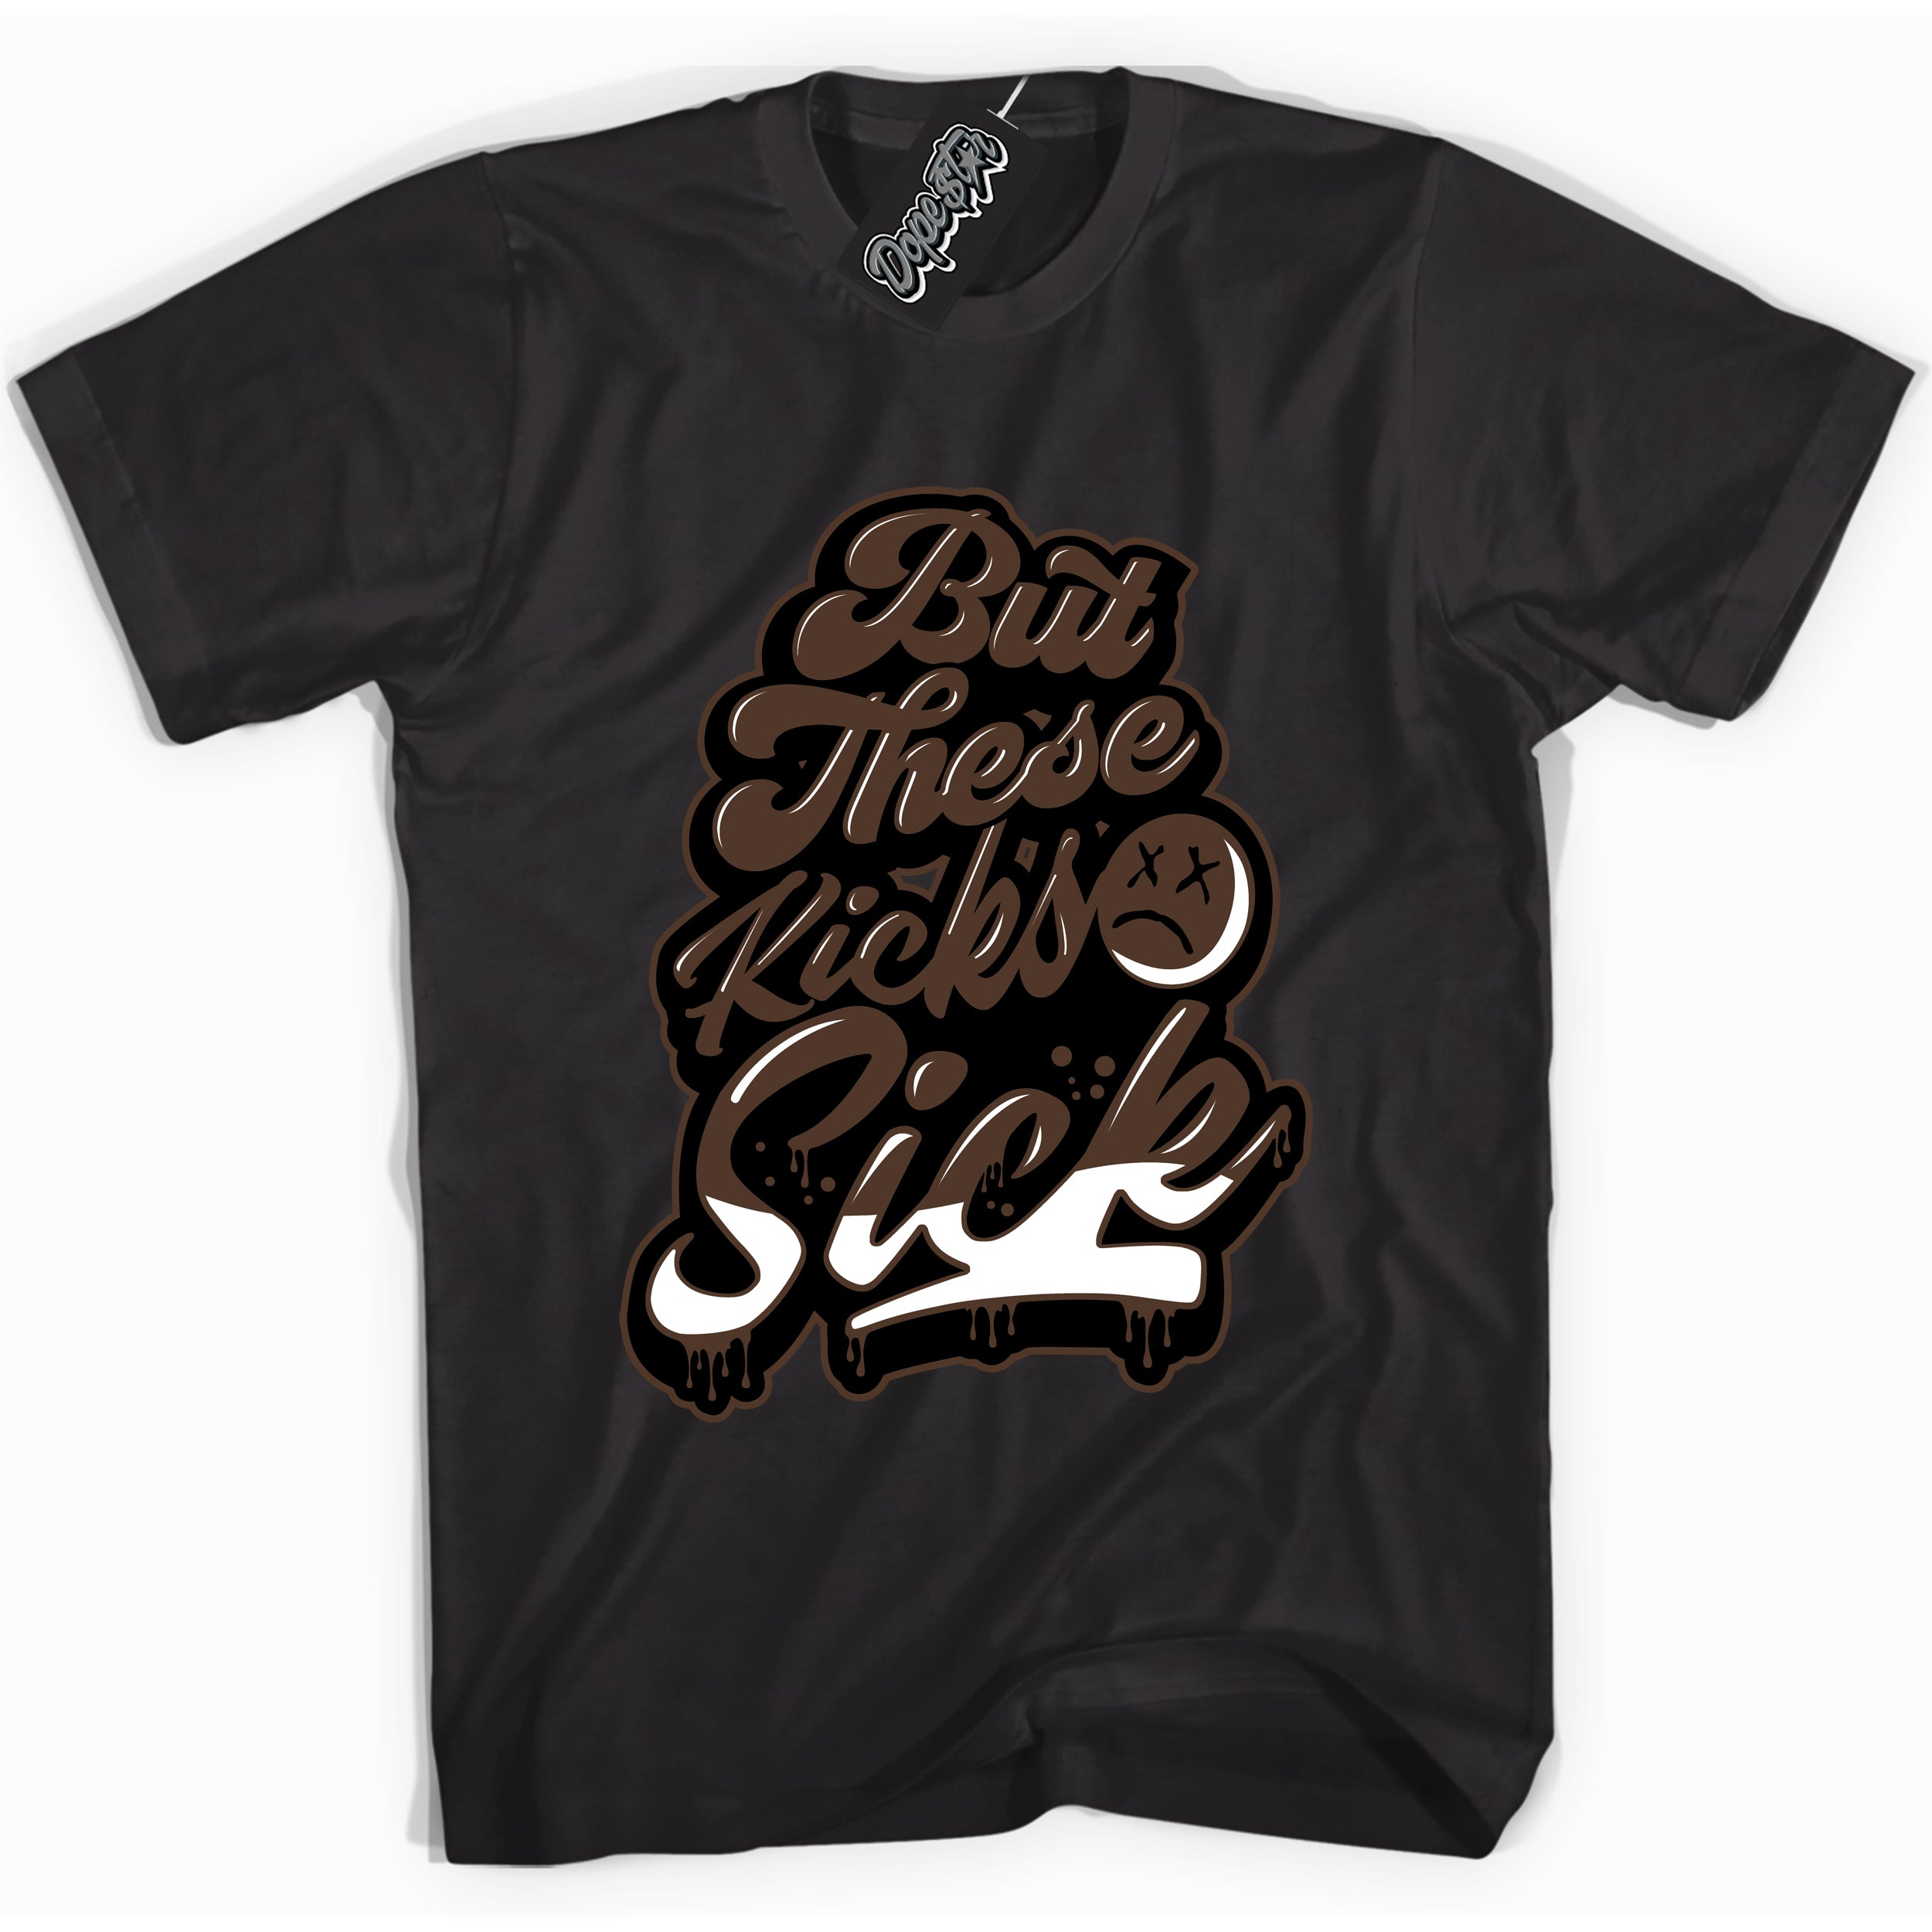 Cool Black graphic tee with “ Kick Sick ” design, that perfectly matches Palomino 1s sneakers 